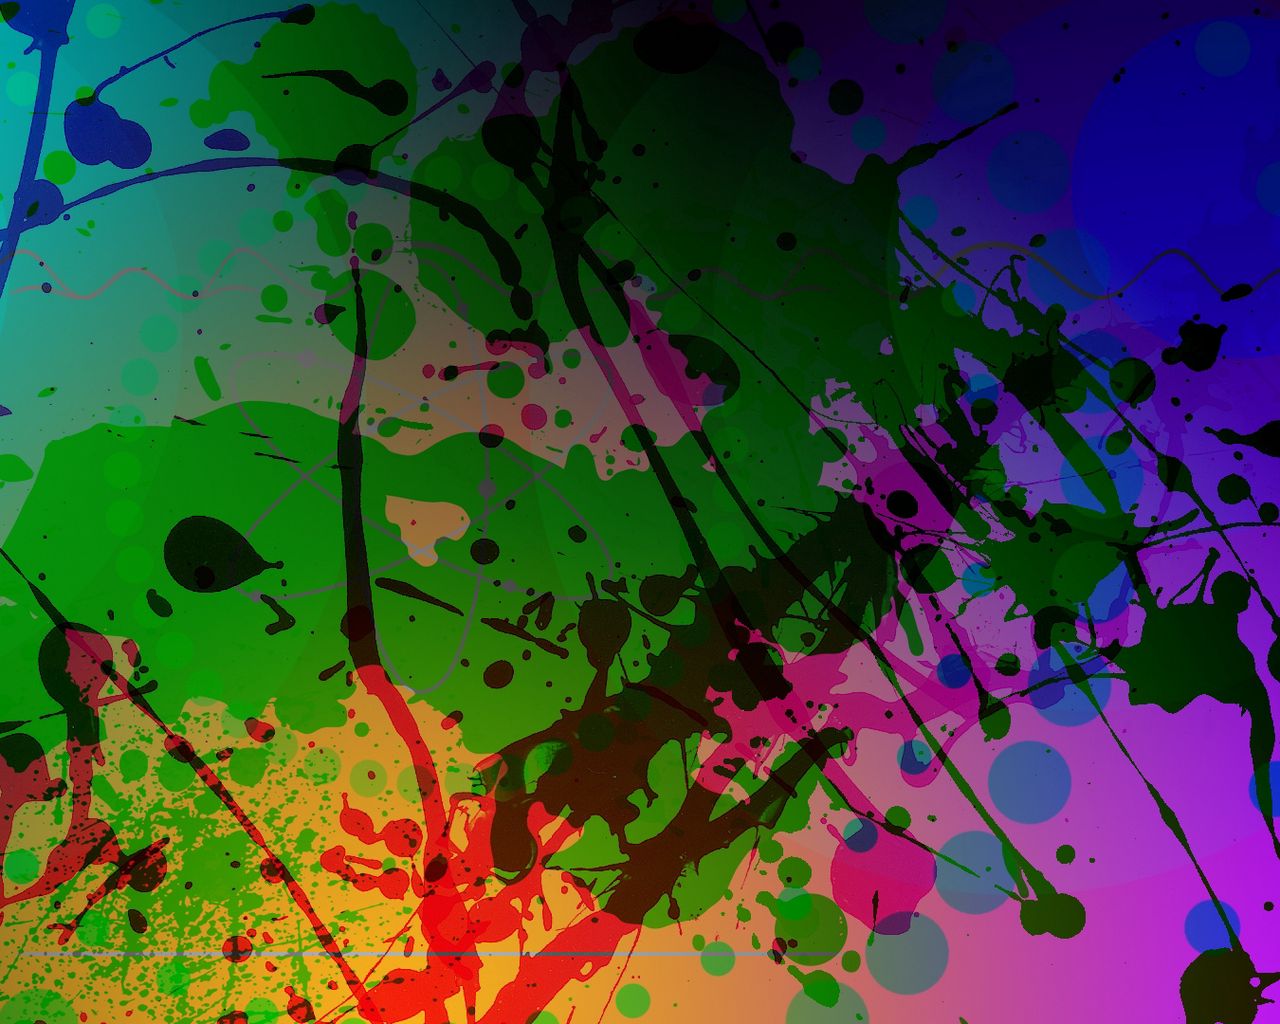 Download wallpaper 1280x1024 abstract, colorful, blur standard 5:4 hd  background